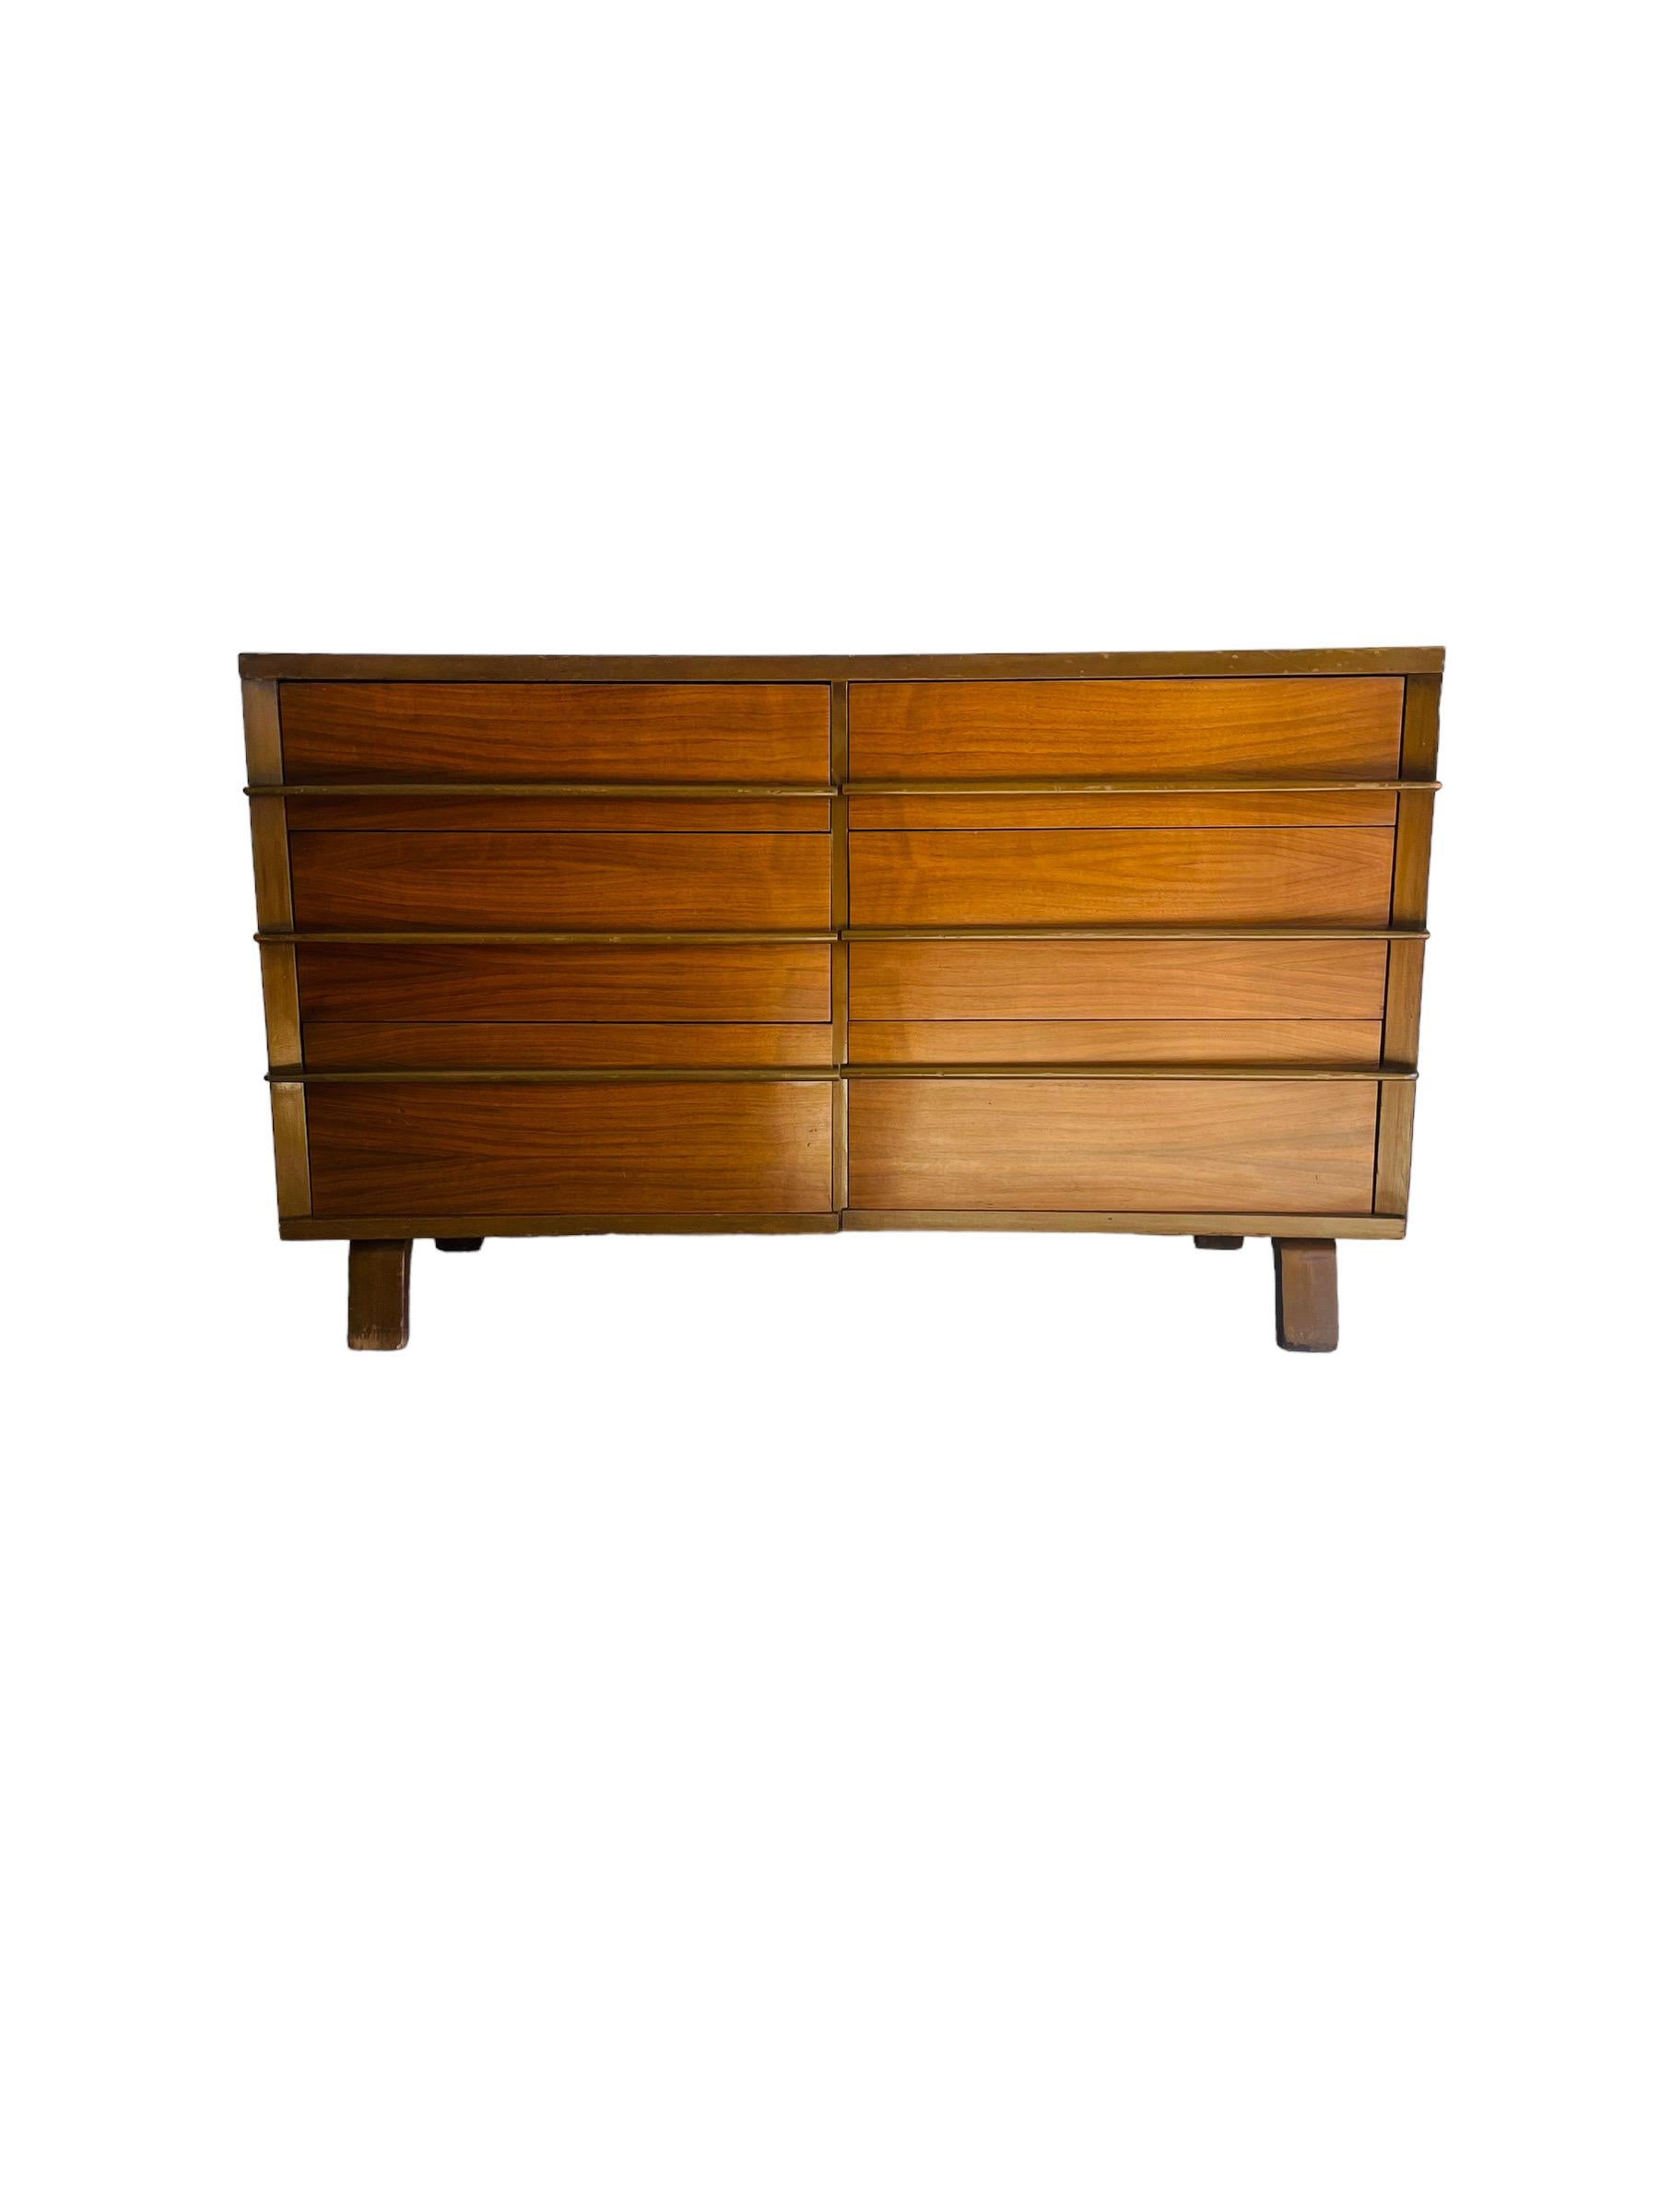 Introducing the Mid-Century Modern Walnut Bow Front Dresser/Credenza, a sleek and stylish storage solution that combines vintage charm with modern sensibility. Crafted from high-quality walnut wood, this exquisite piece features a bow Front Design